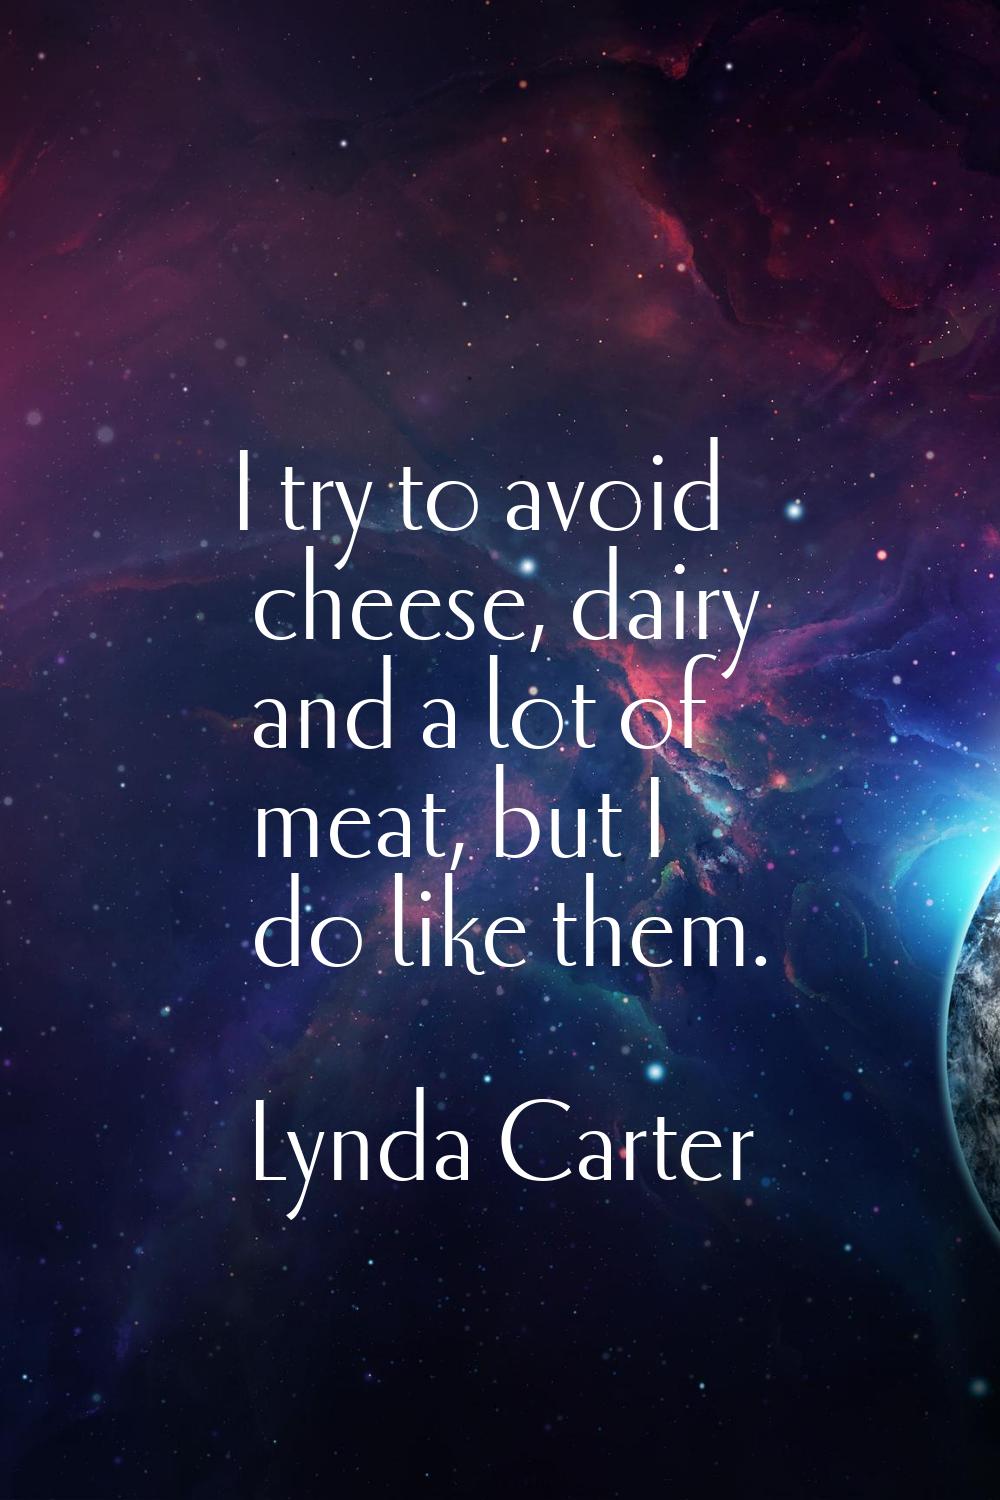 I try to avoid cheese, dairy and a lot of meat, but I do like them.